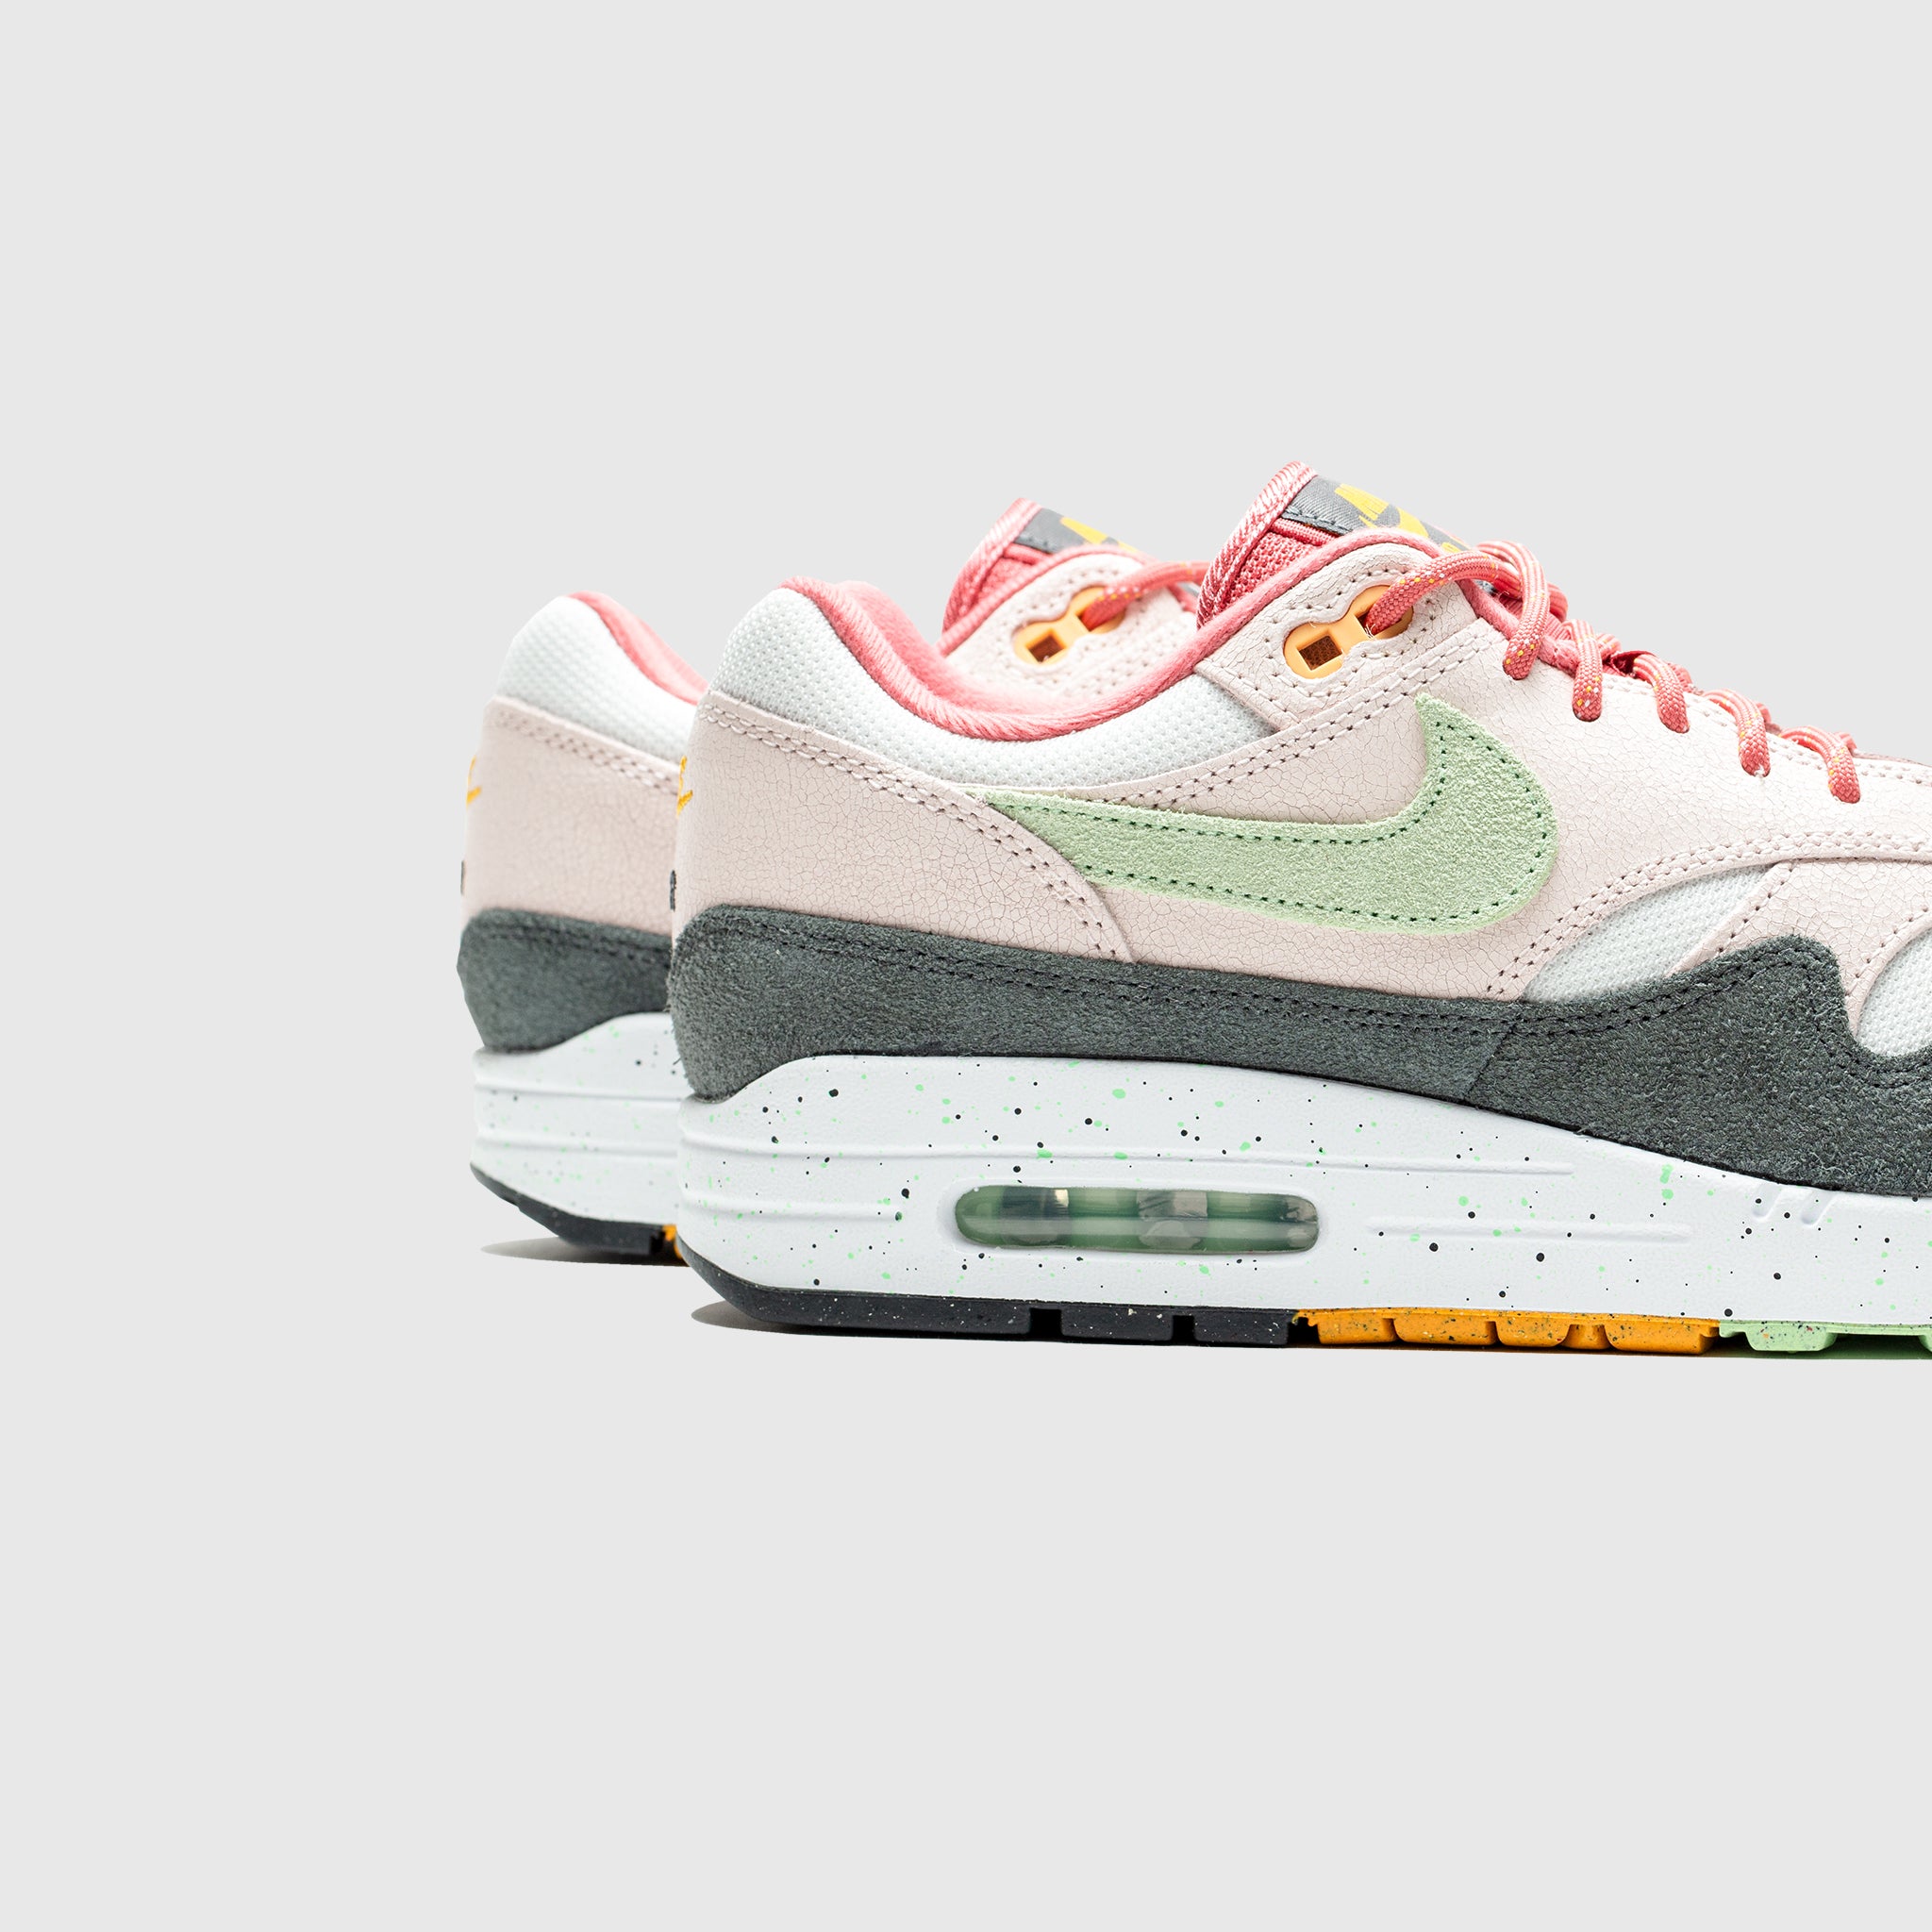 AIR MAX 1 "EASTER CELEBRATION"